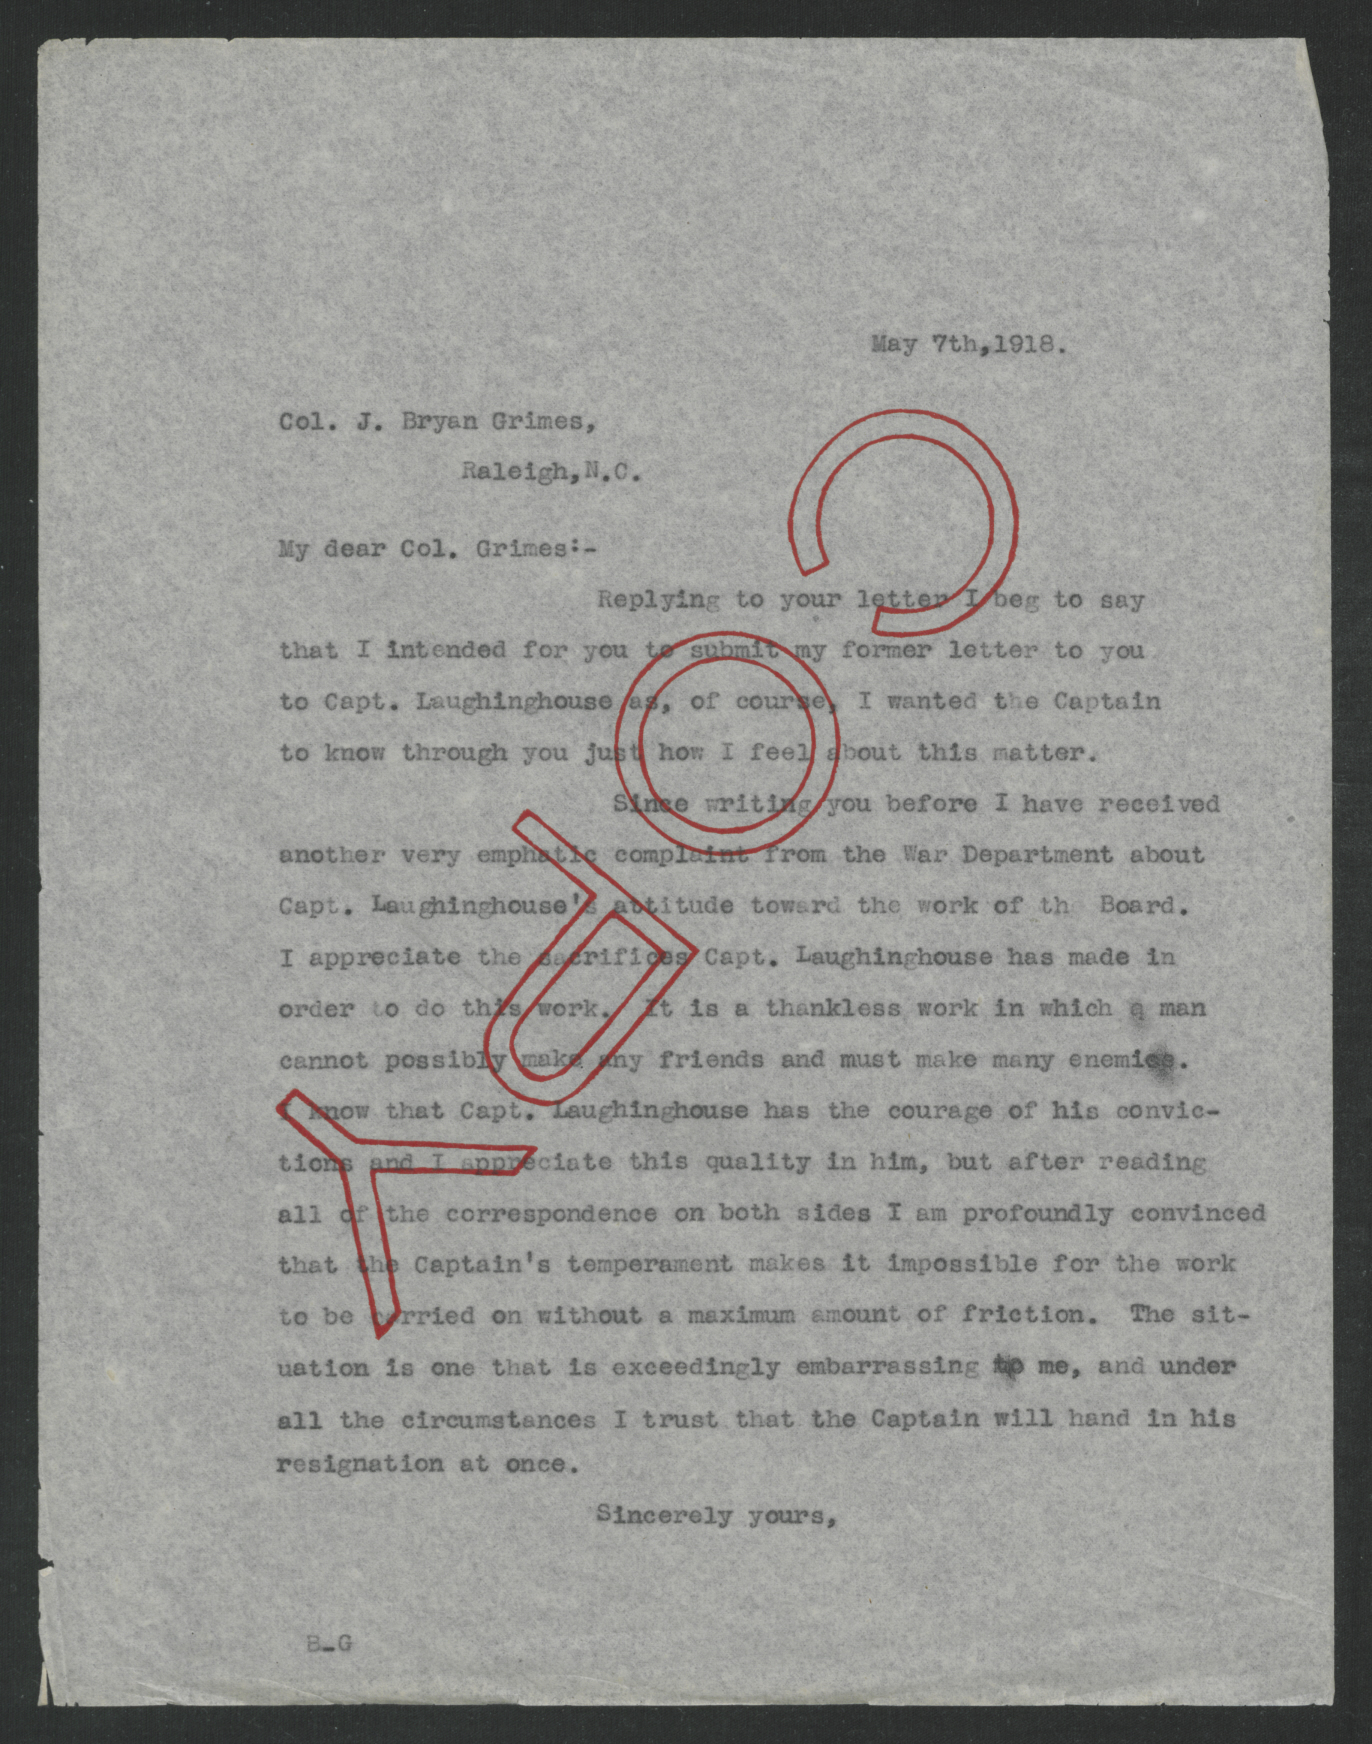 Letter from Thomas W. Bickett to J. Bryan Grimes, May 7, 1918